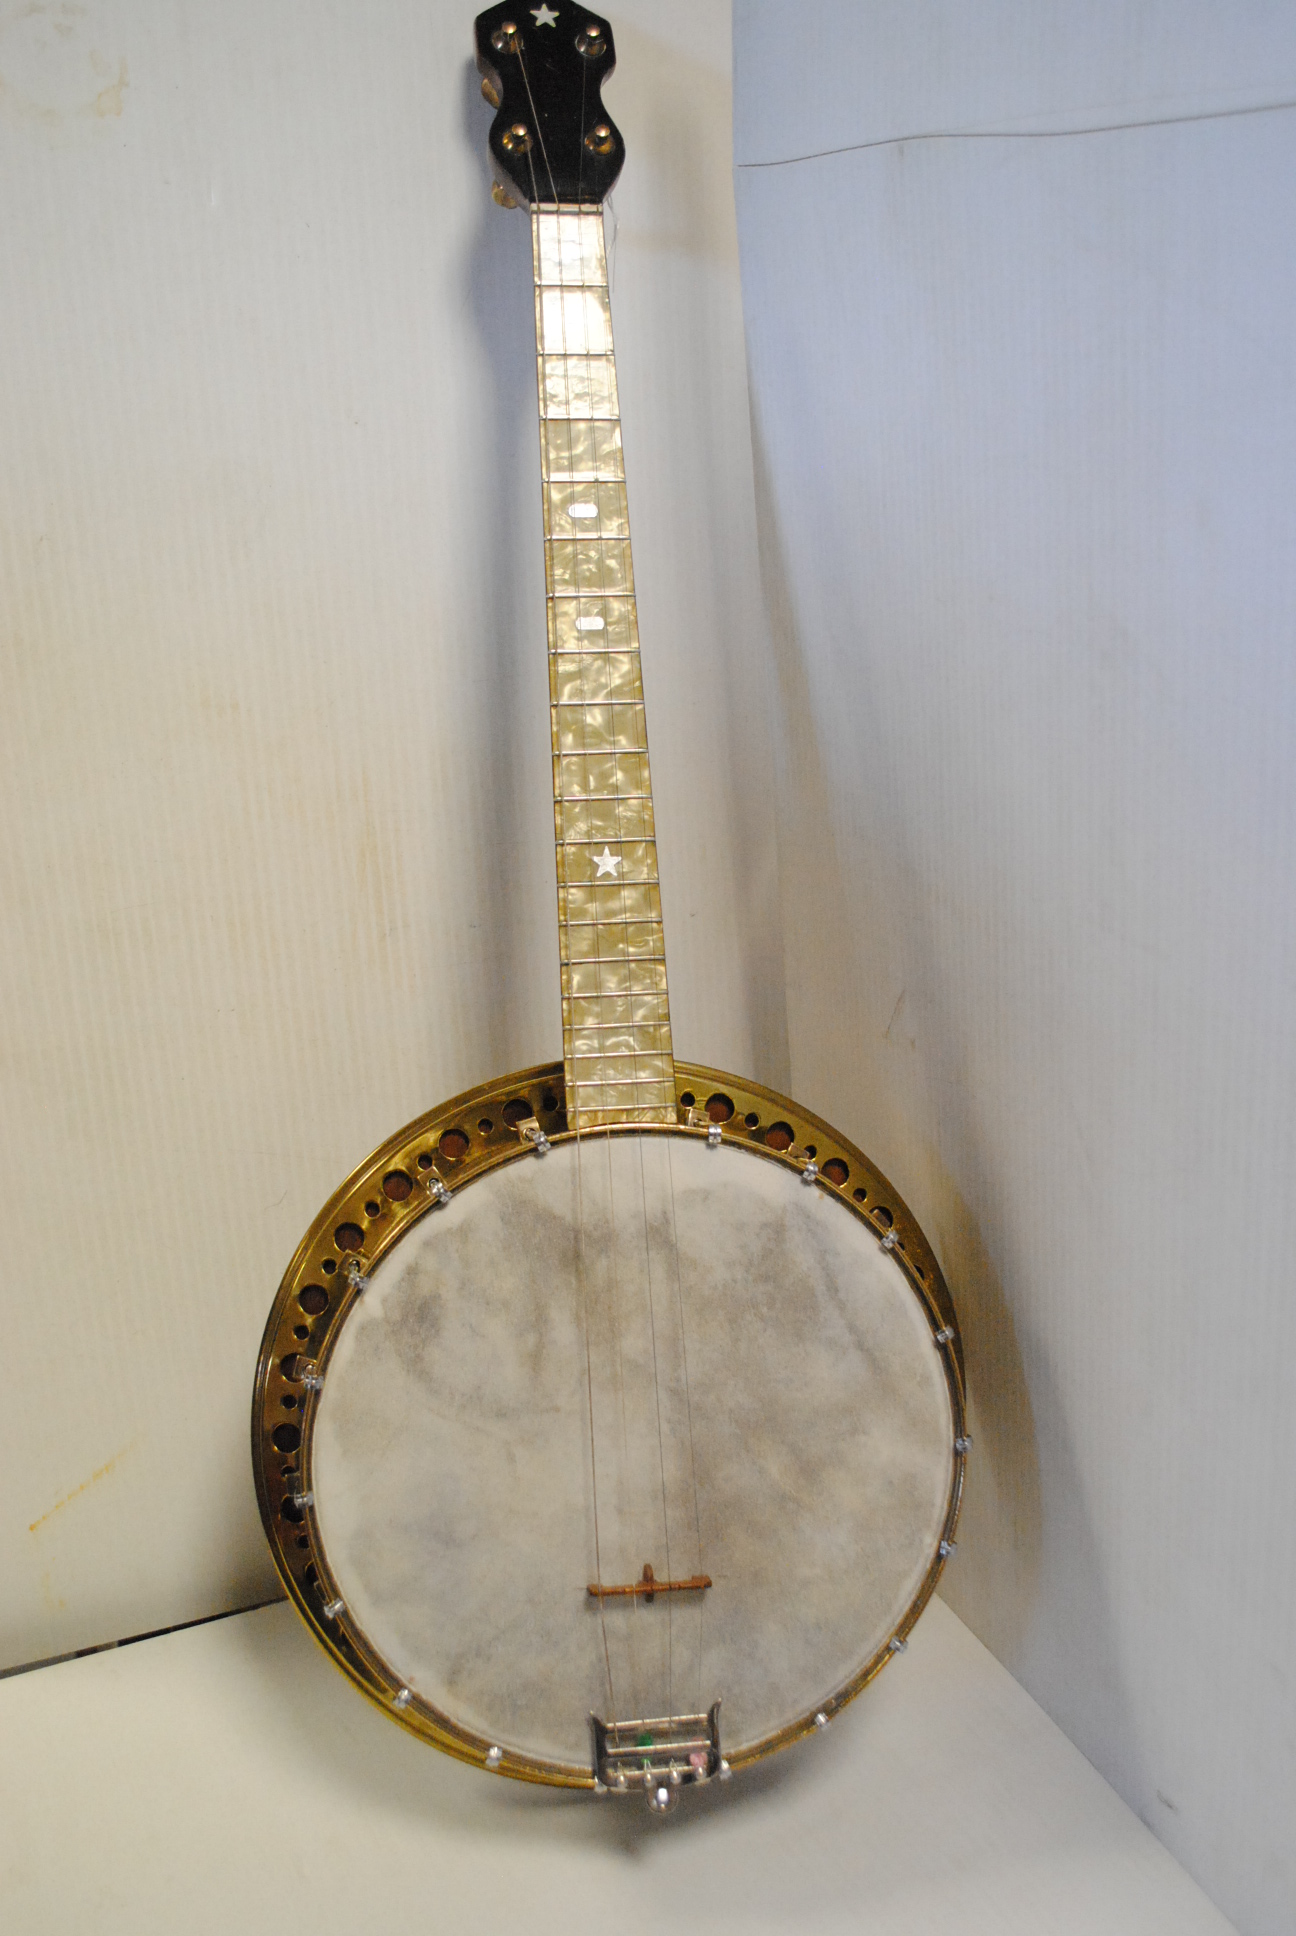 Banjo, four string resonator banjo, 19 fret finger board with simulated mother of pearl